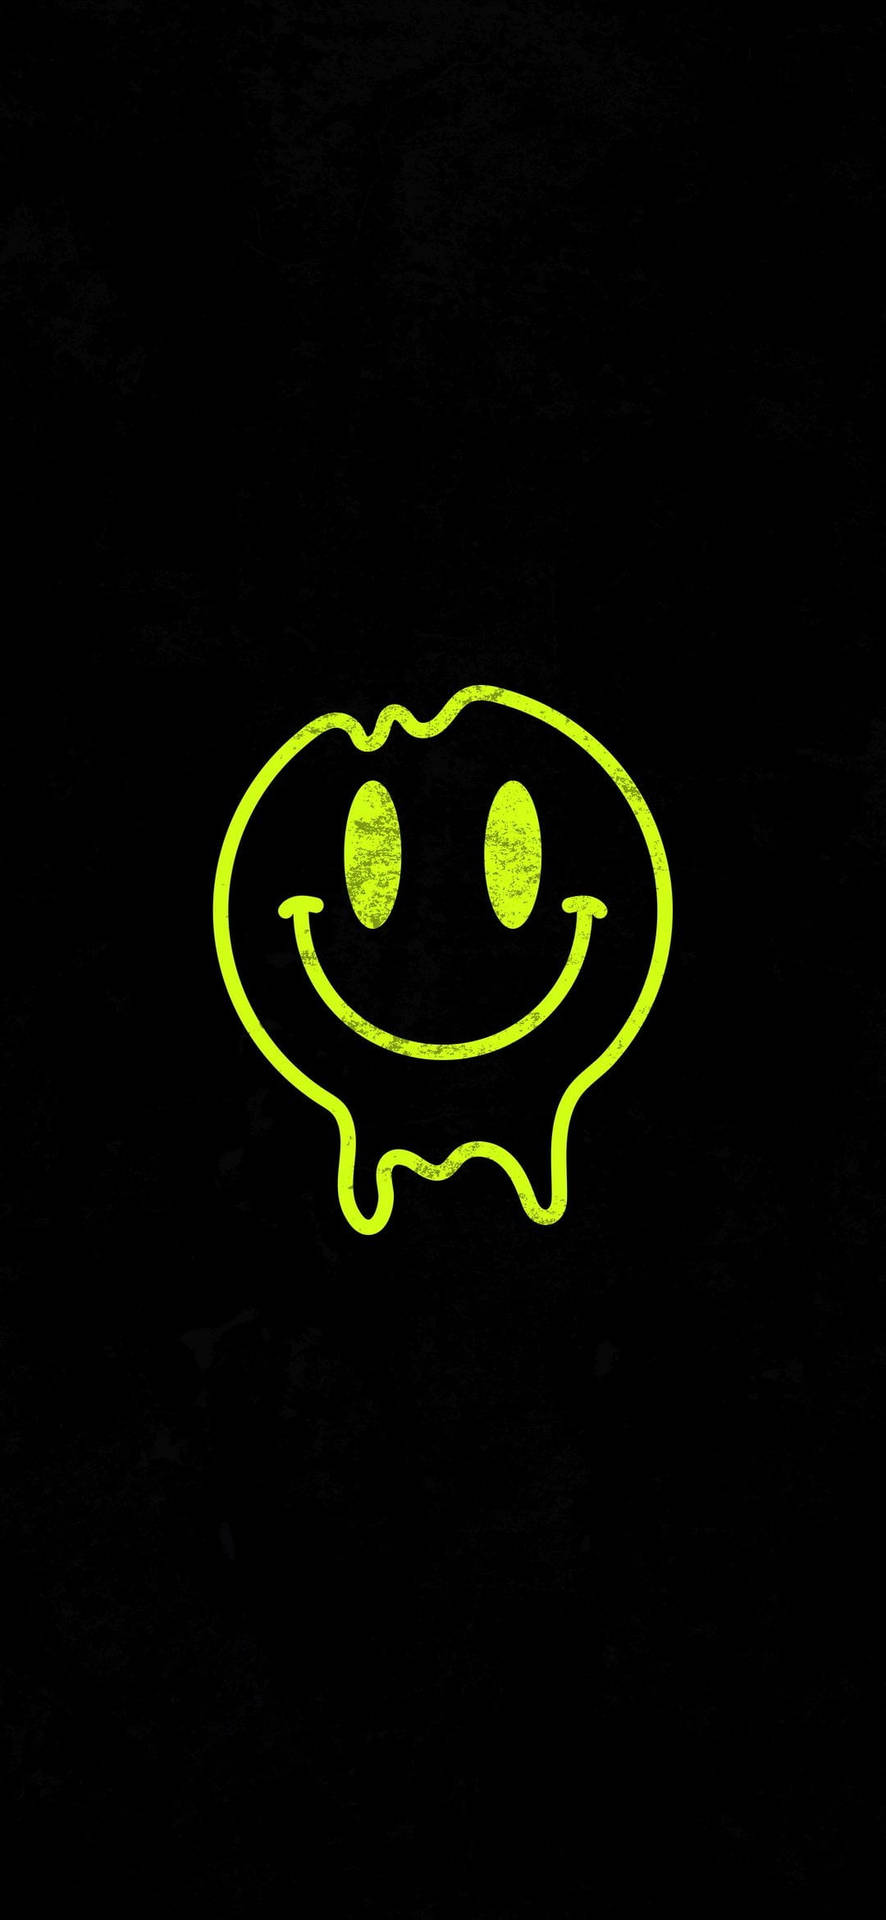 Download Black And Green Smiley Face Wallpaper | Wallpapers.com